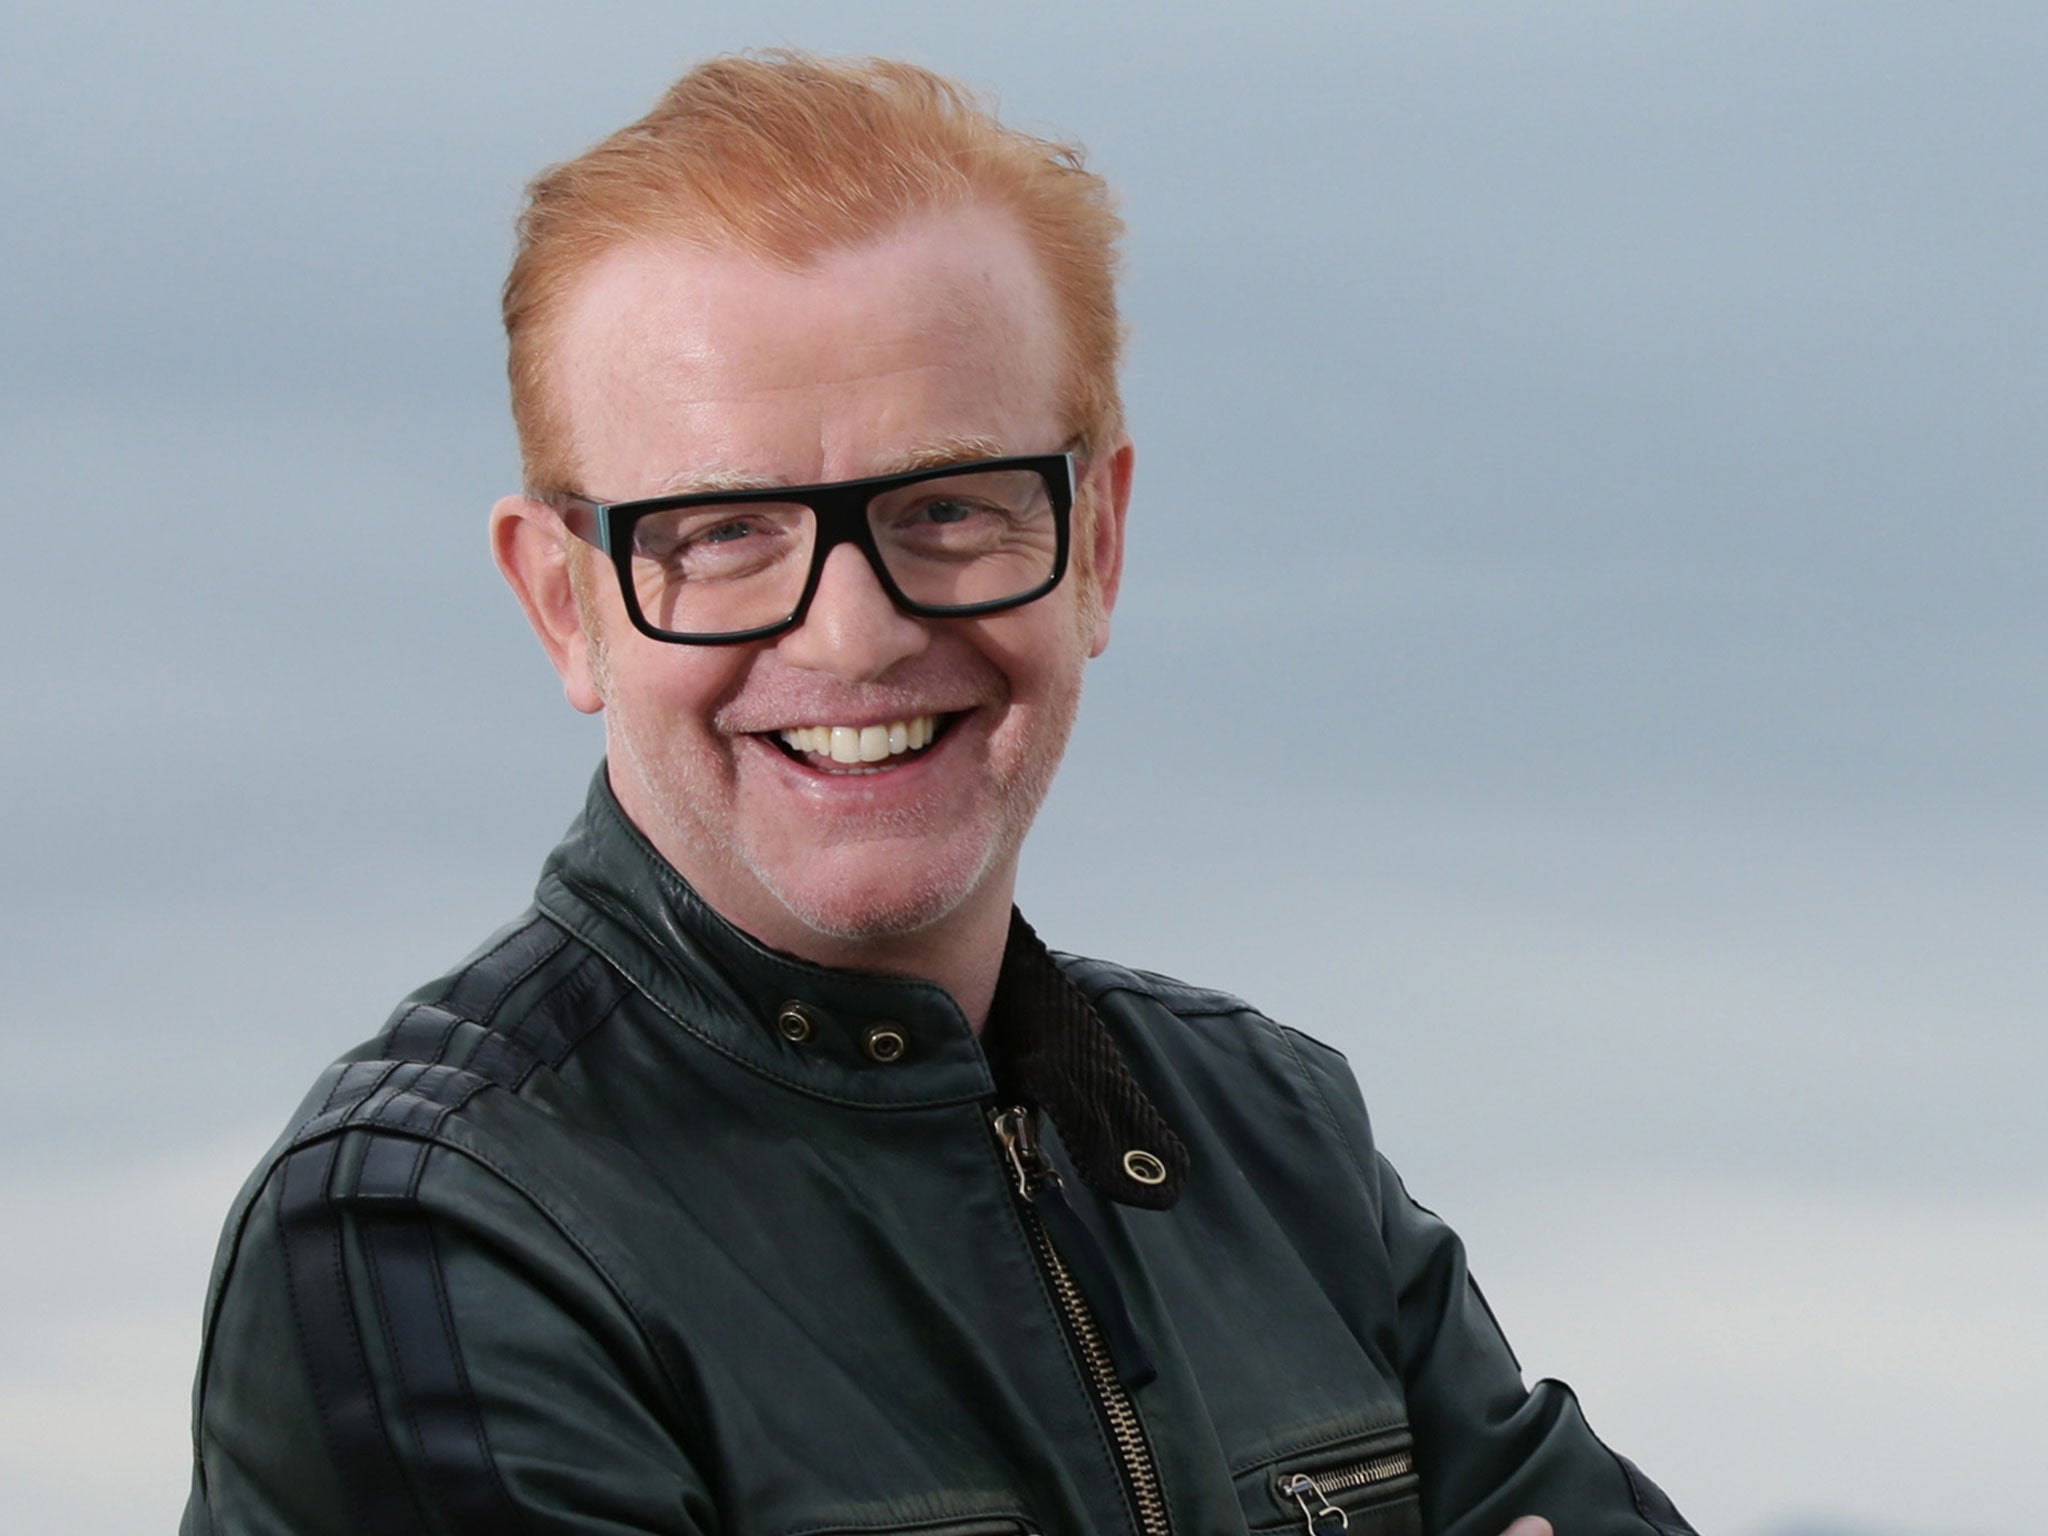 The new proposals will mean only the very top earners, like Top Gear host Chris Evans, will have their salaries published